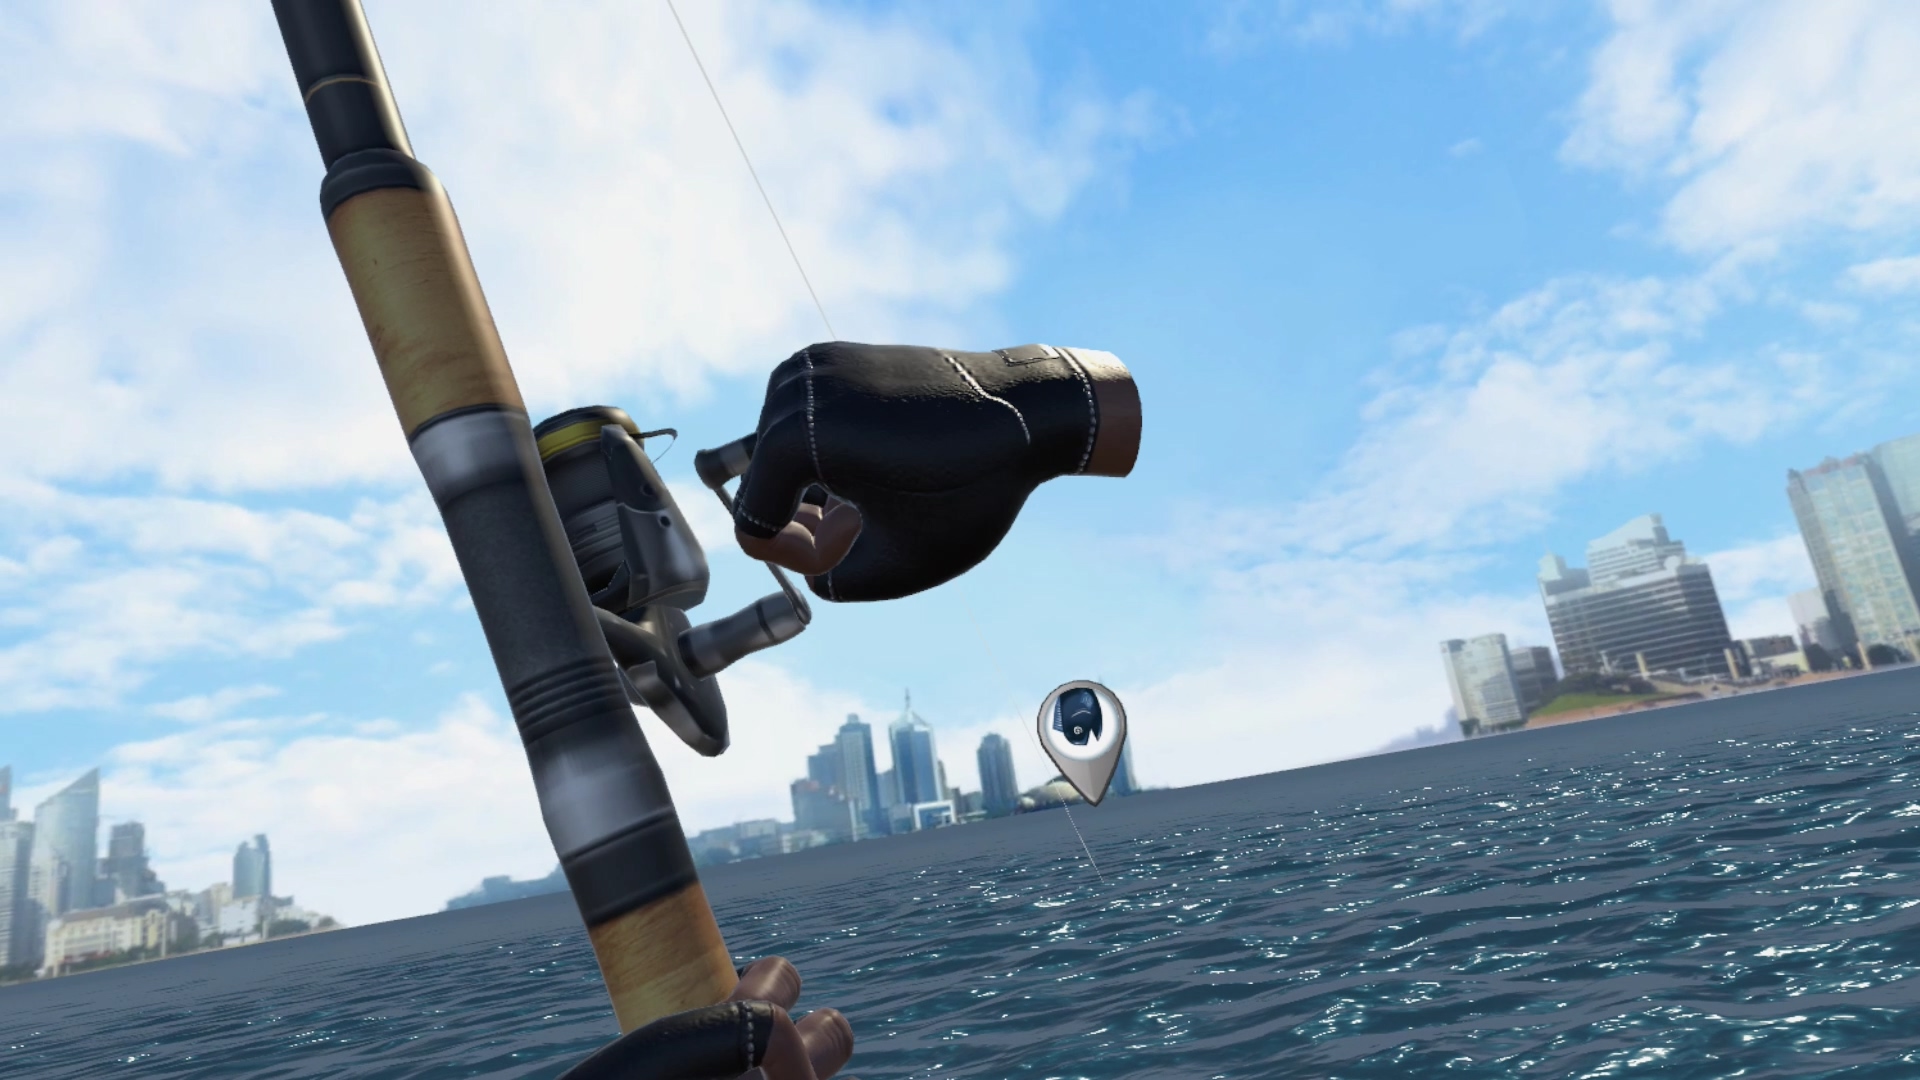 Real Fishing VR on Steam